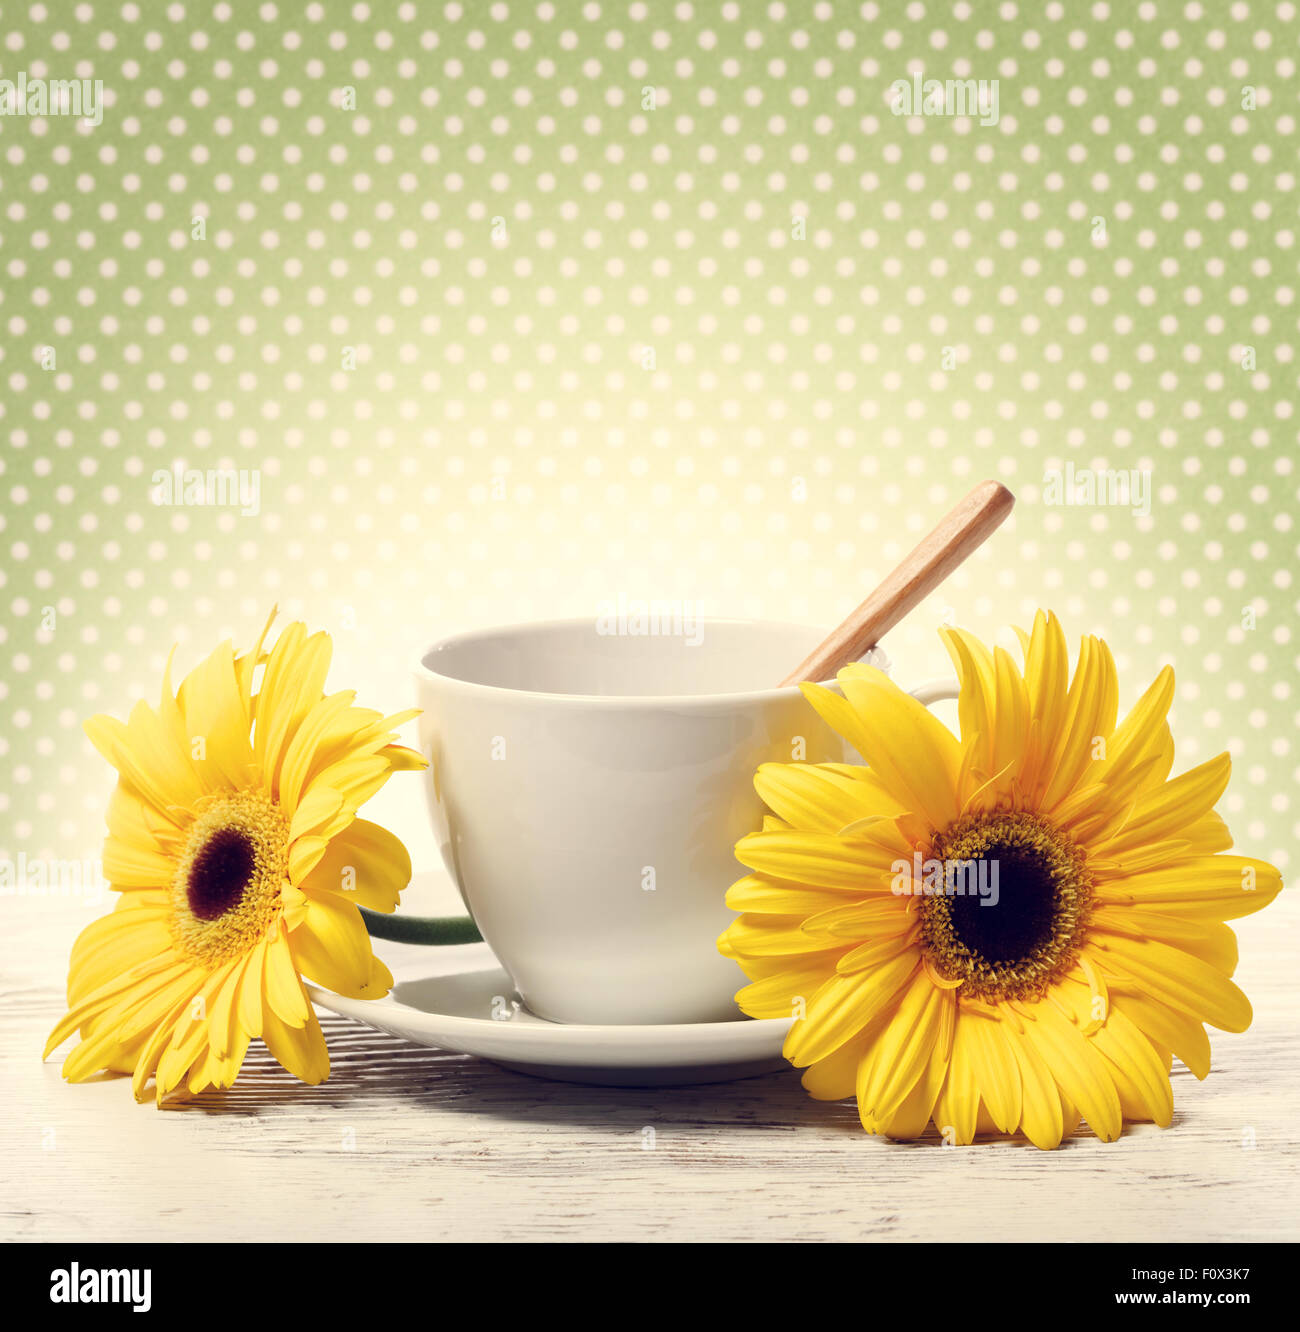 Coffee cup with yellow gerberas over green polka dot background Stock Photo